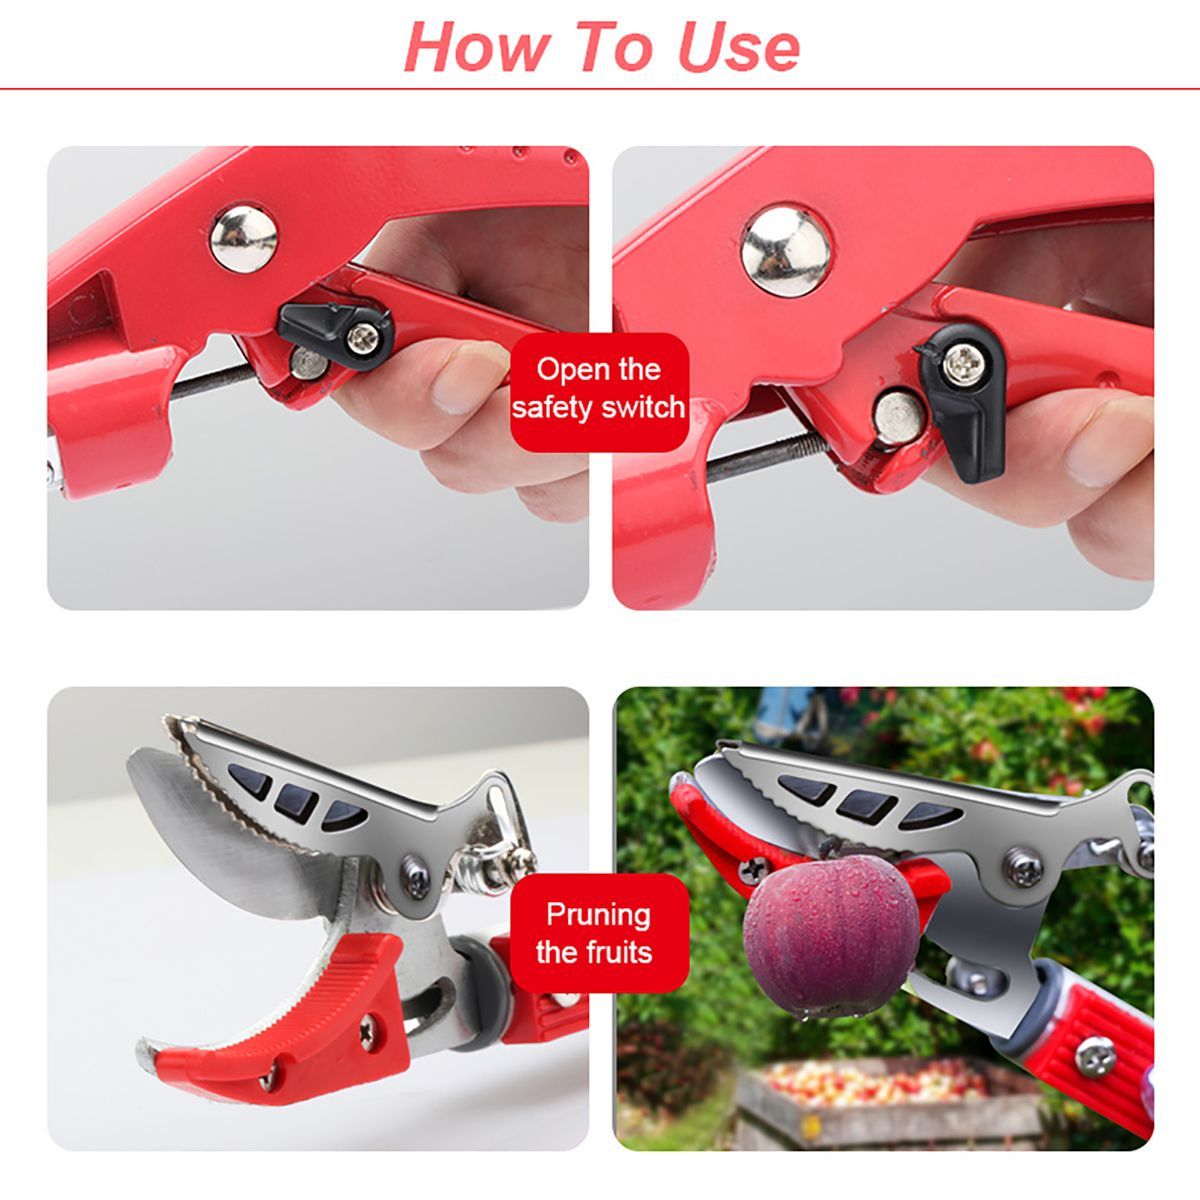 Professional-Grafting-Tool-Pruning-Garden-Shears-for-Cutting-Stems-Light-Branches-of-Trees-Rose-Bush-1601292